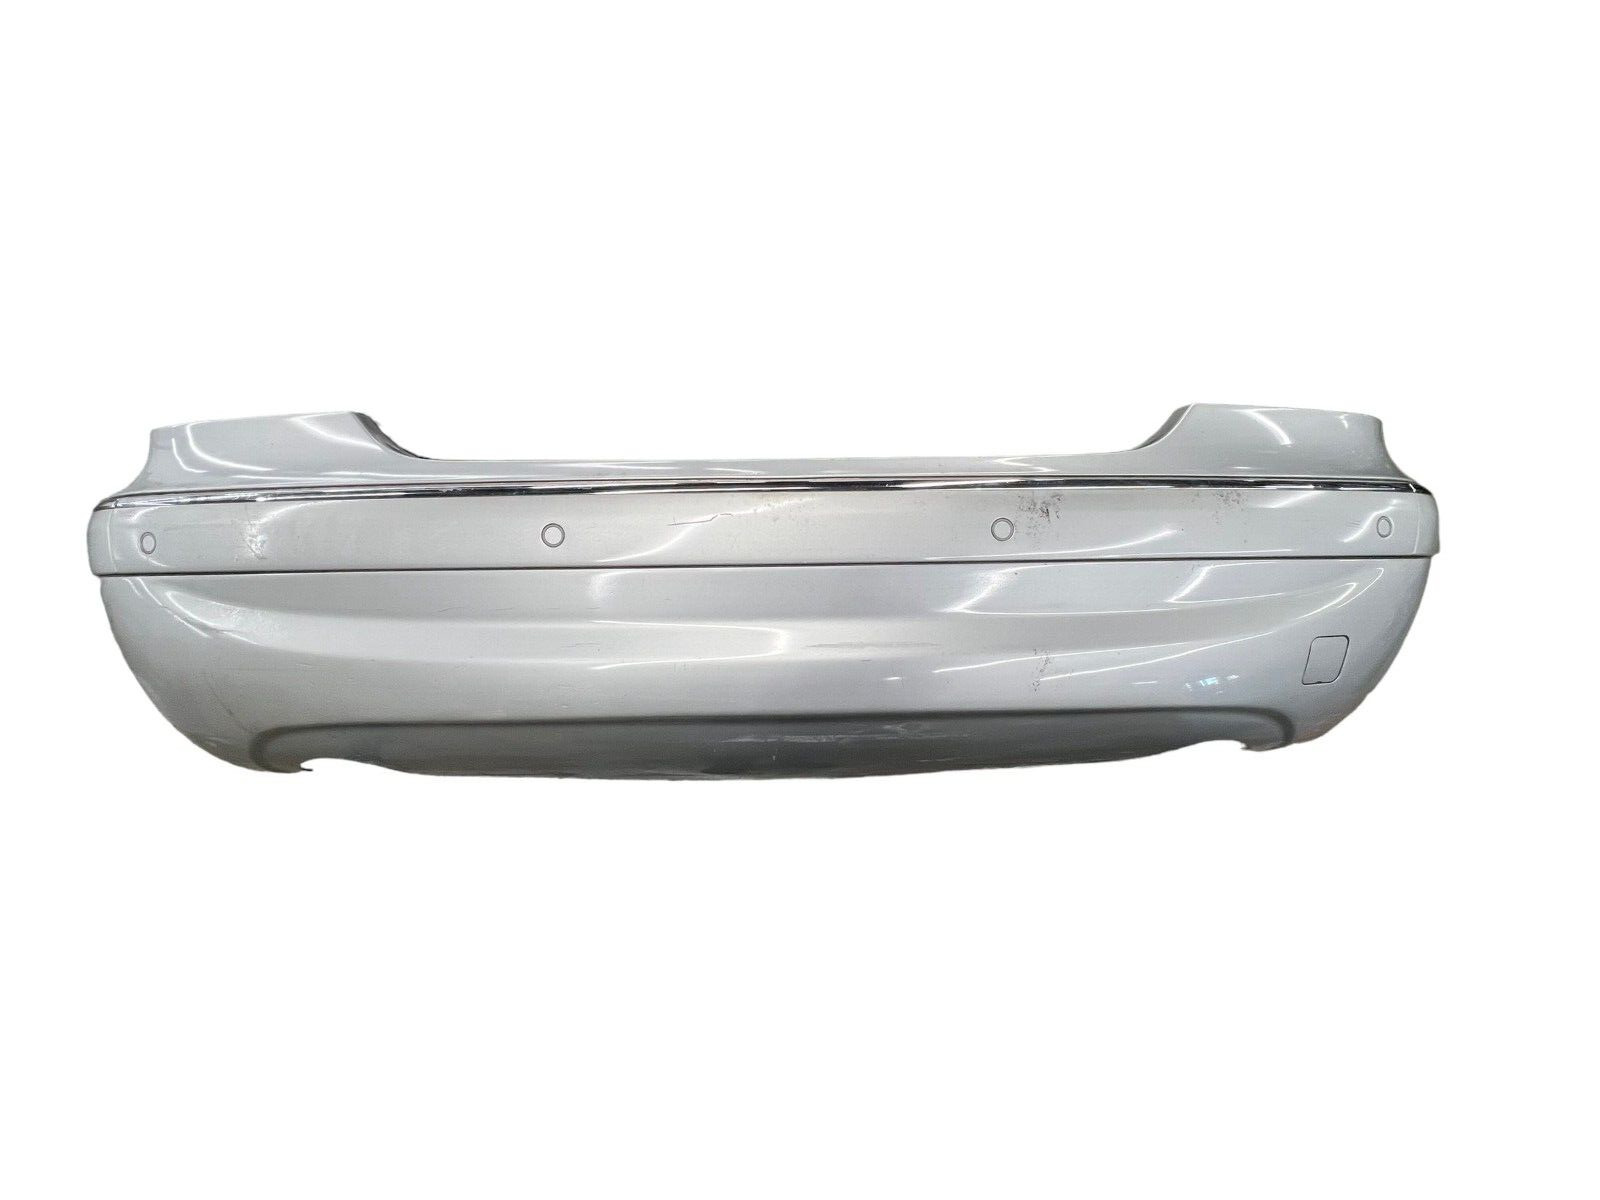 00-06 Mercedes AMG Rear Bumper Cover Silver for W215 CL500 CL600 CL55